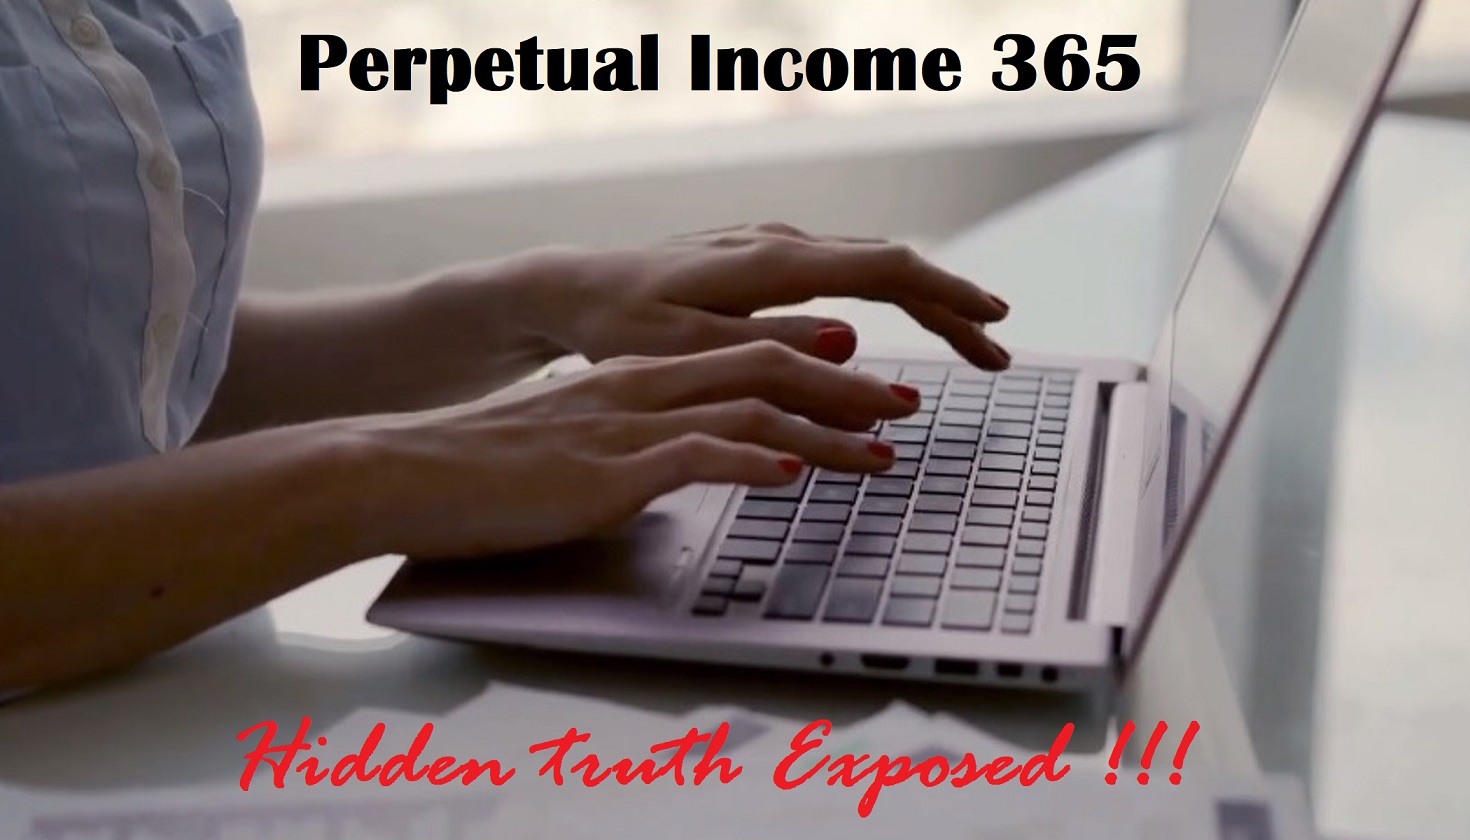 You are currently viewing What is Perpetual Income 365? – Review exposing the Scam